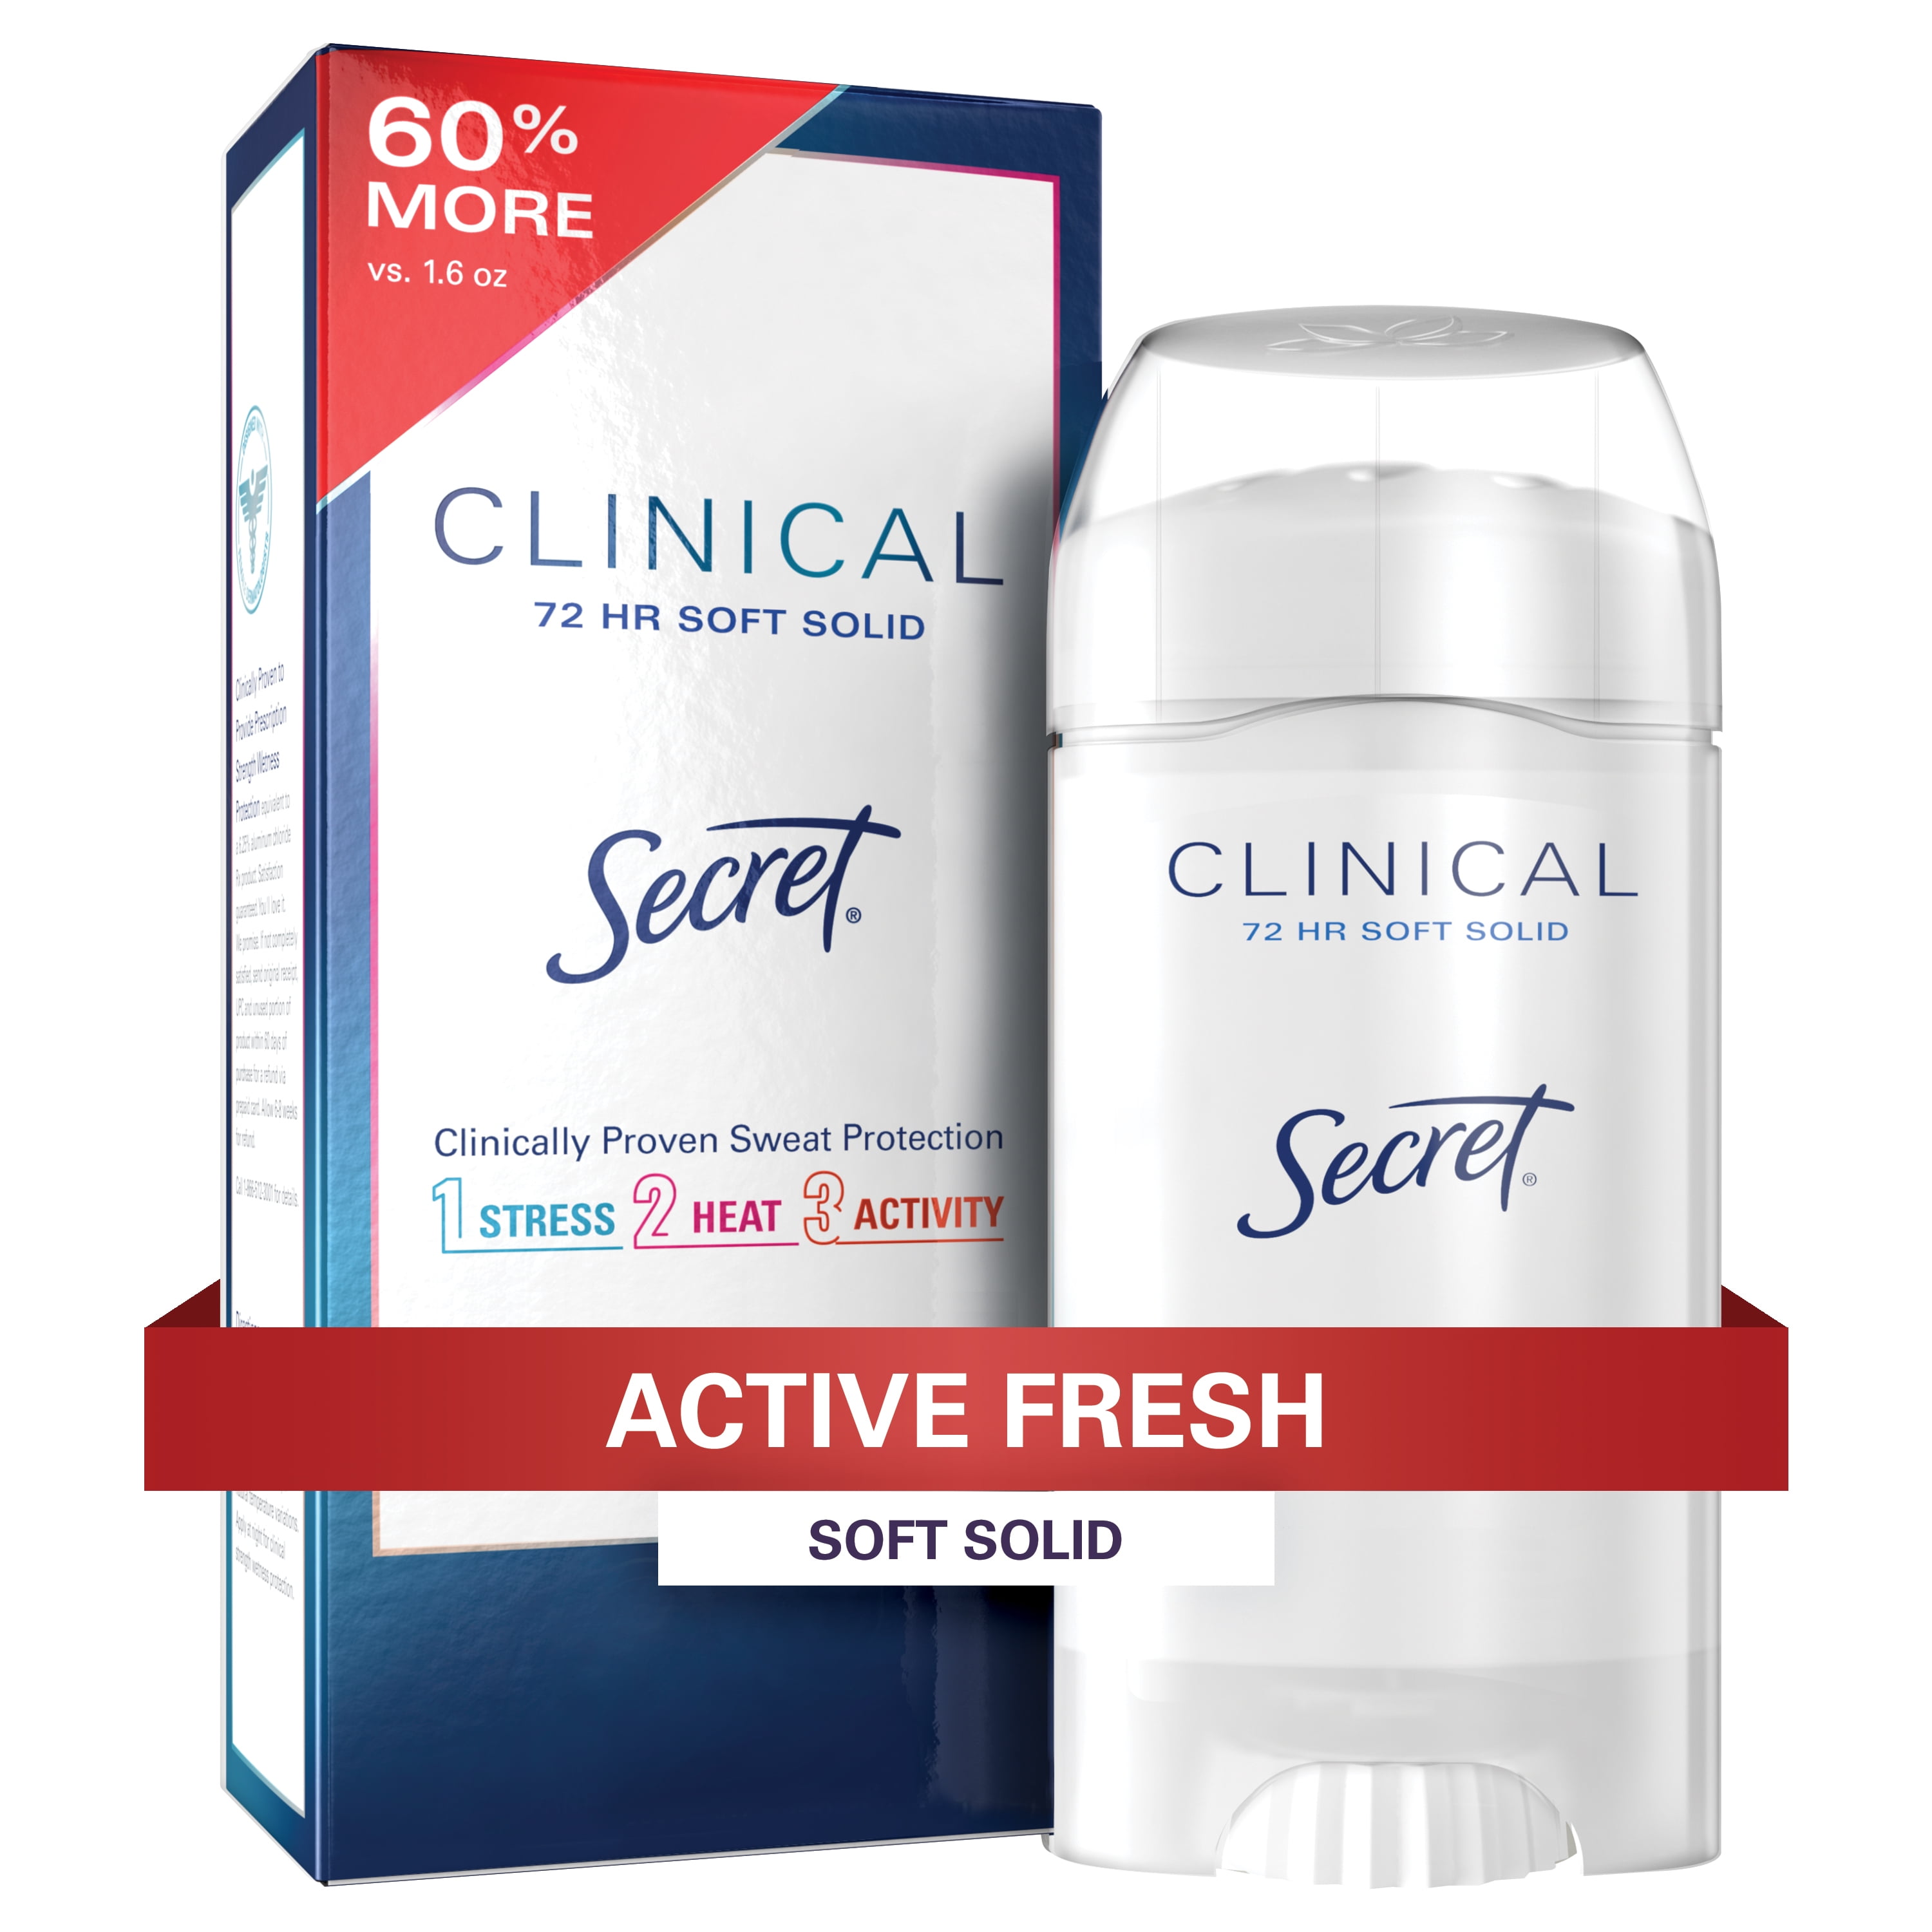 Secret Clinical Strength Soft Solid Antiperspirant and Deodorant, Active Fresh, 2.6 oz